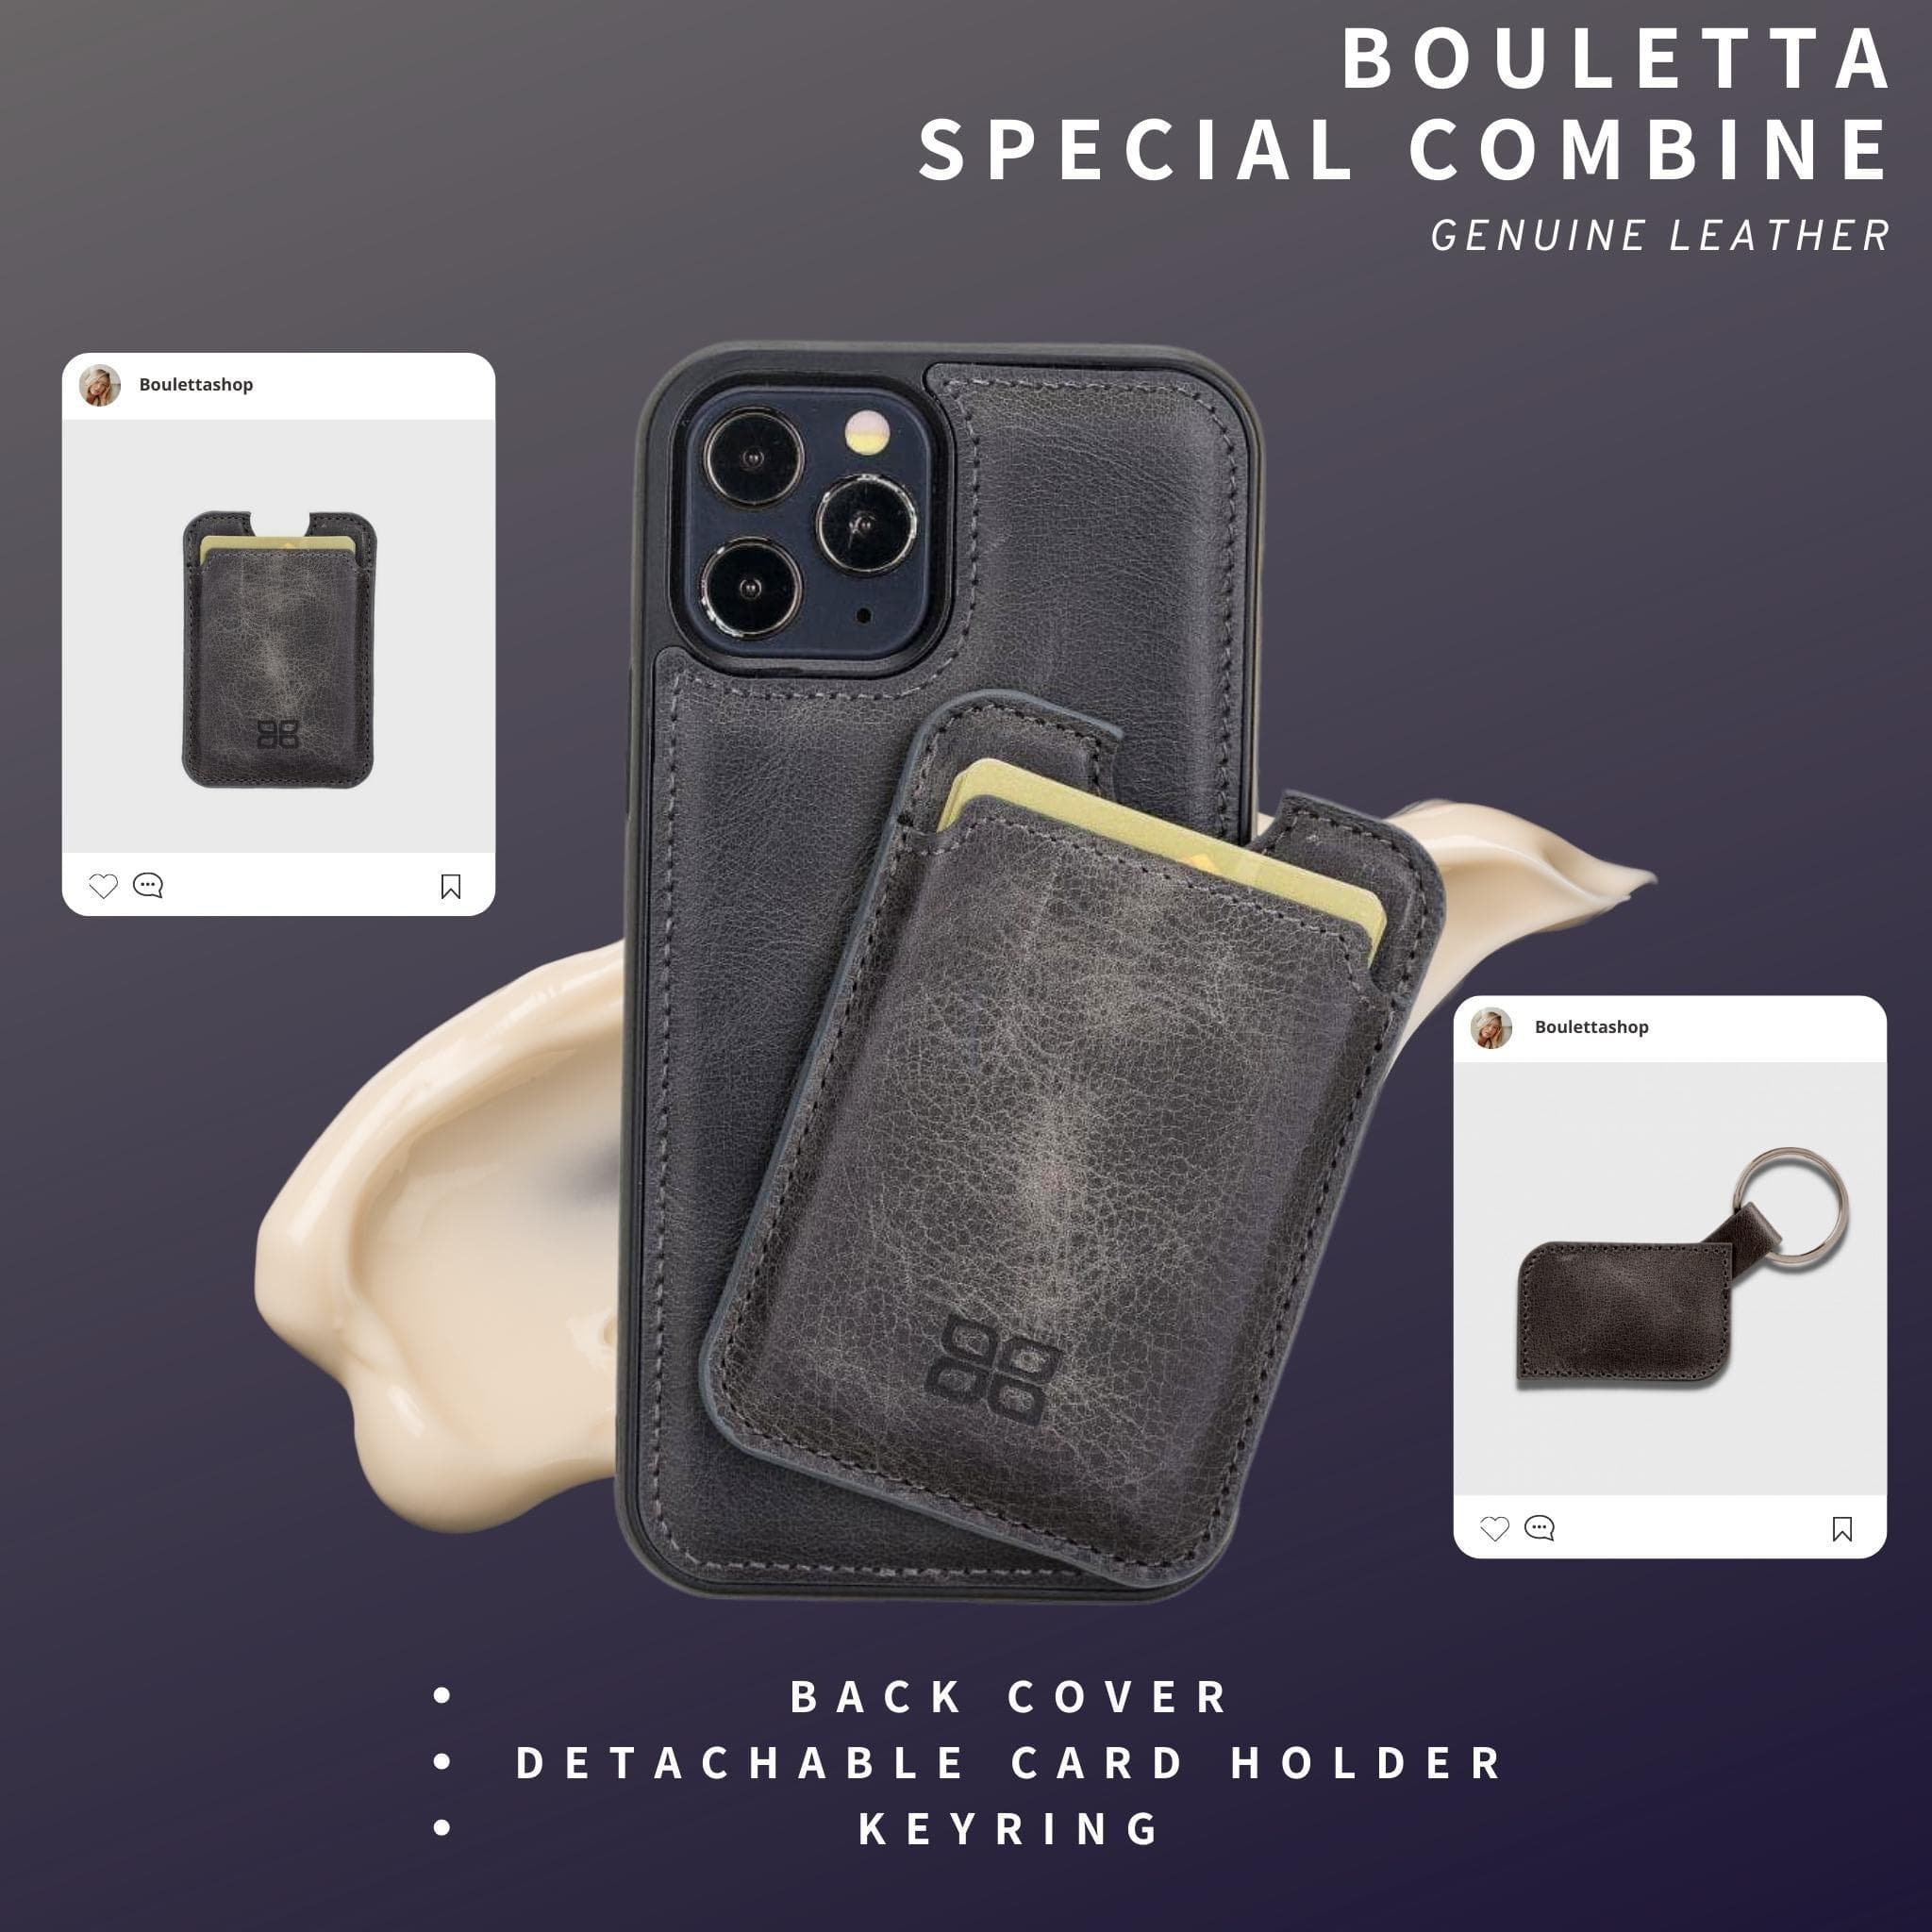 Bouletta Special Combine Leather Back Cover, Card Holder and Keyring Blue Bouletta LTD